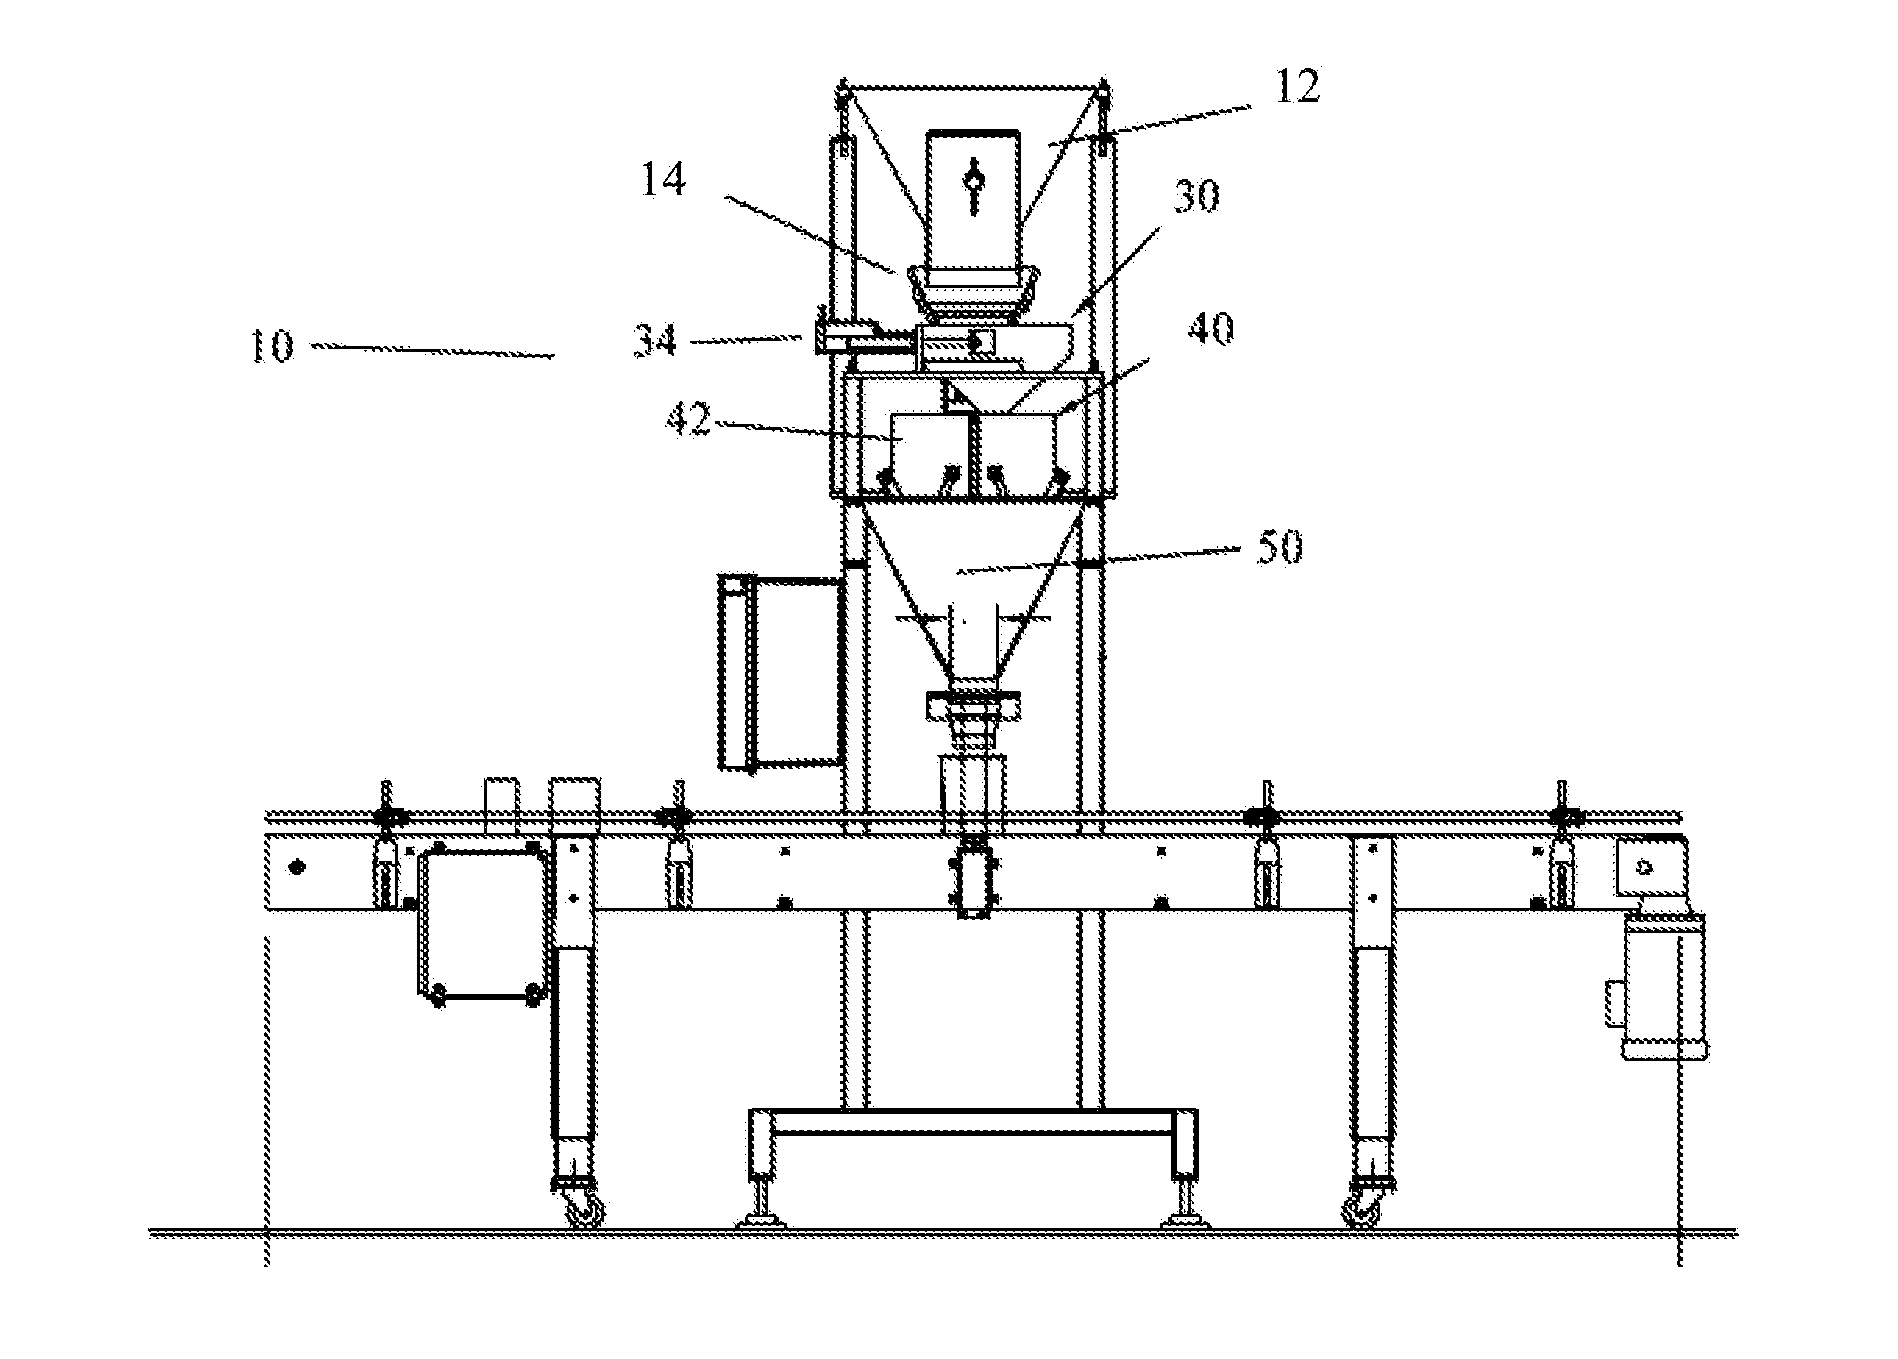 Automatic Weight Scale Machine with Unalterd Primary Product Feed Rates and Diverter System